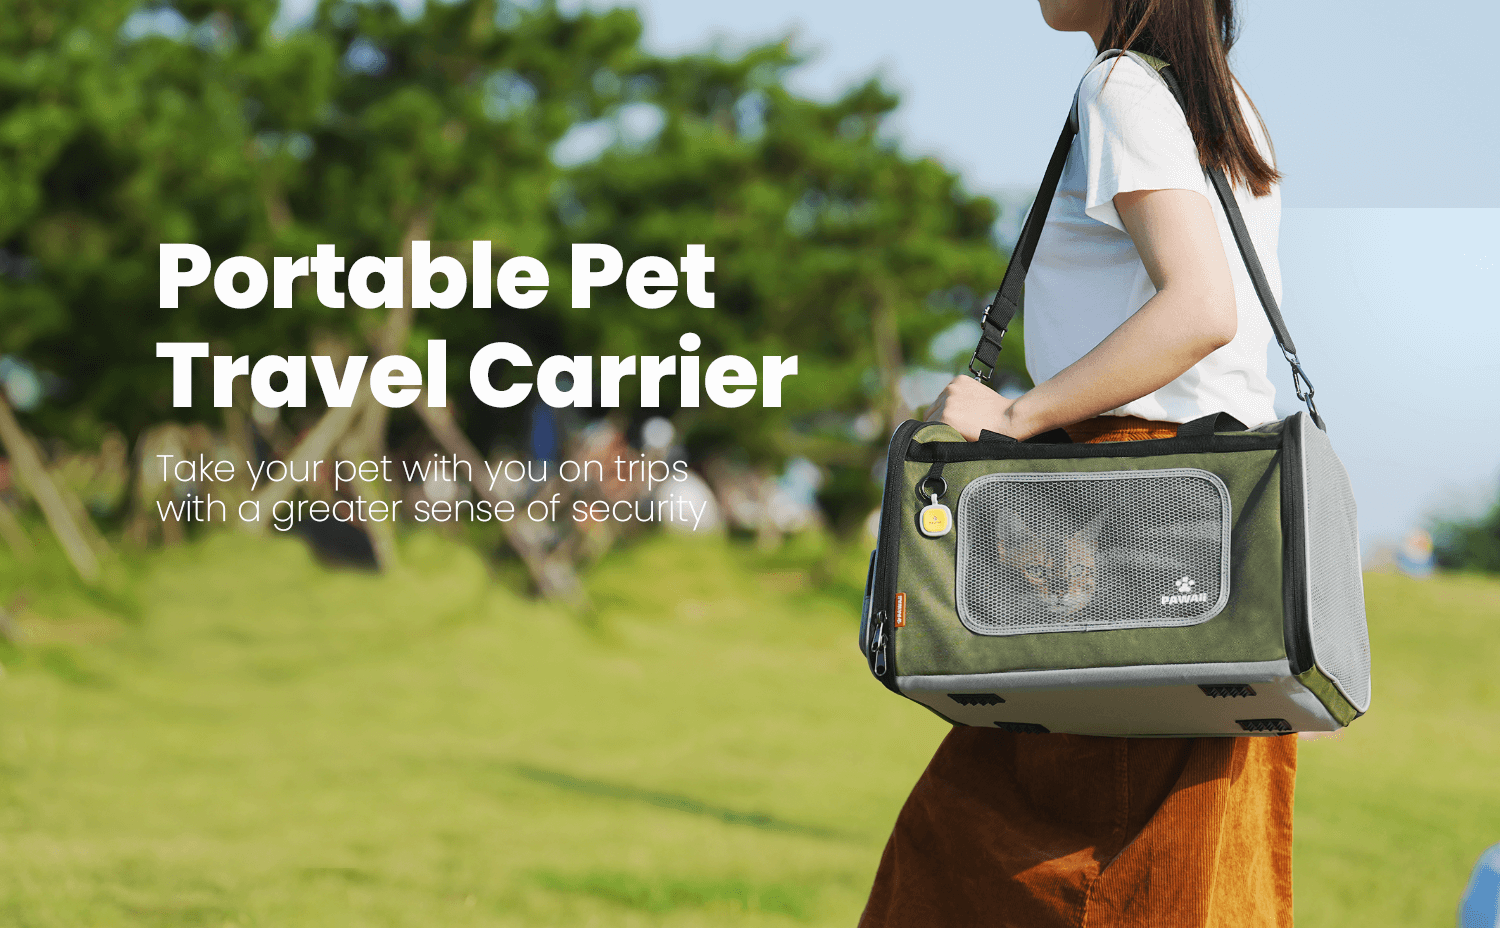 High Quality Durable expandable Airline approved Pet Carrier bag for Travel